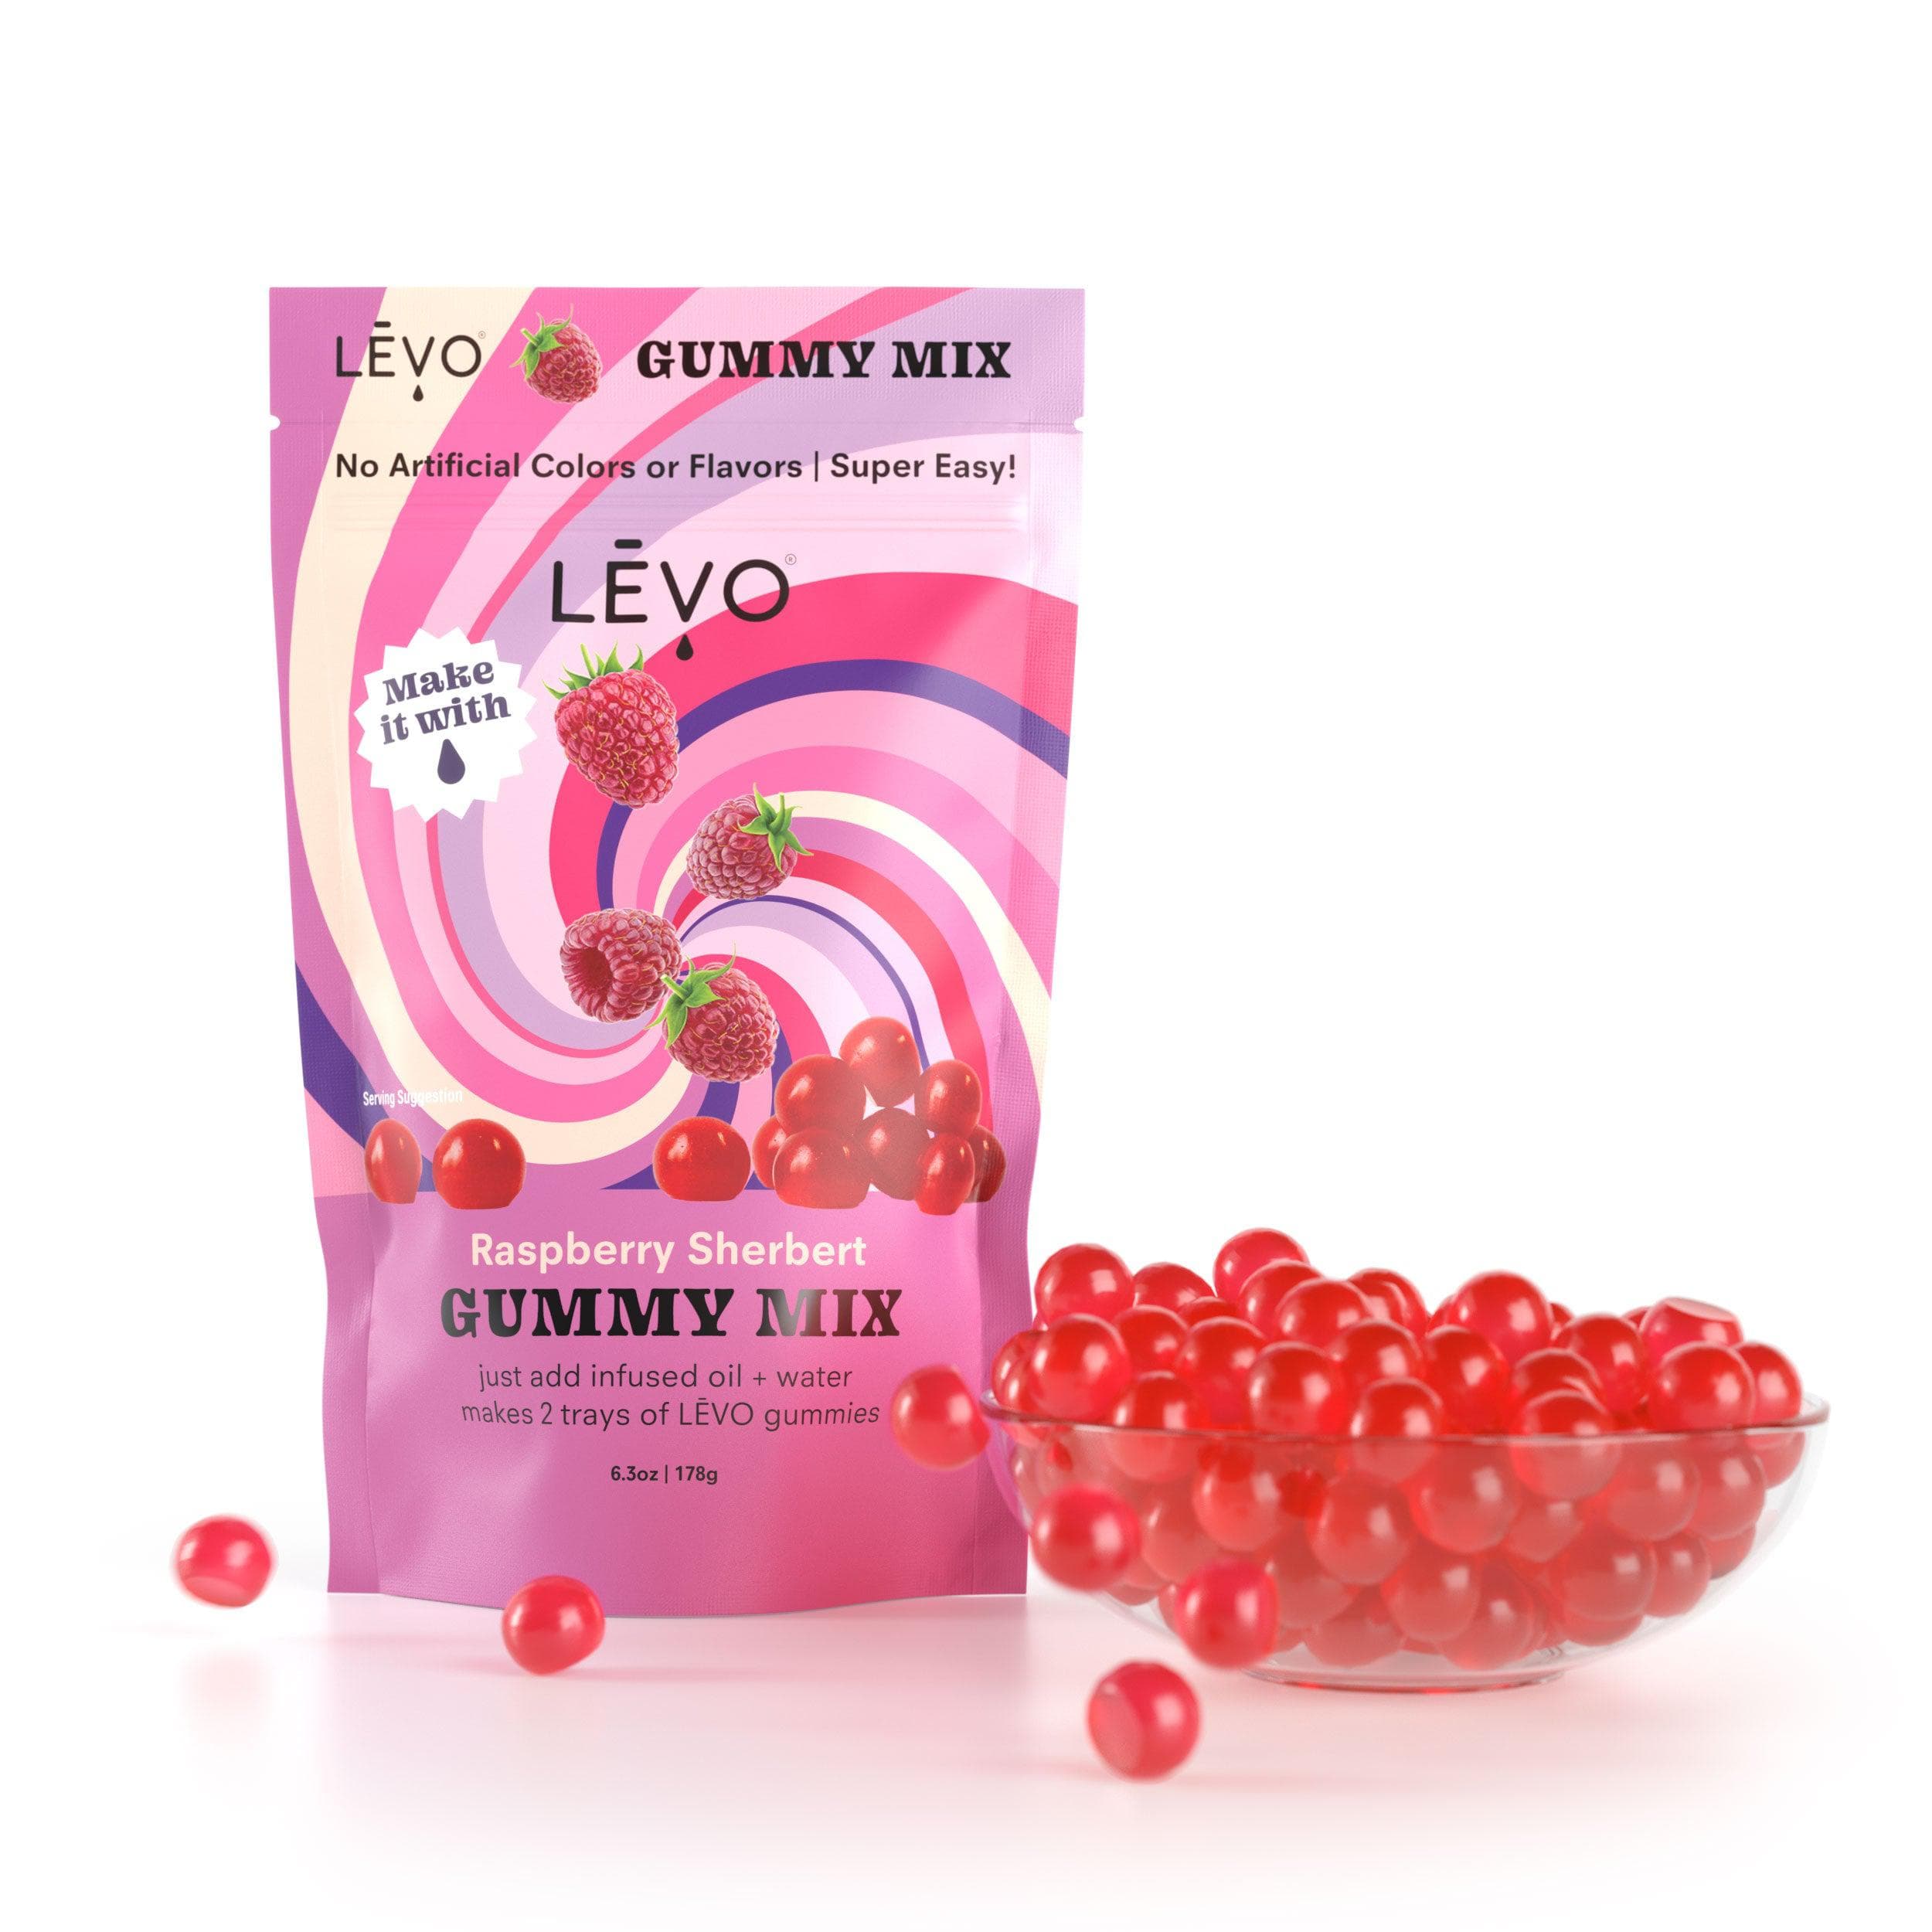 LEVO Raspberry Sherbert gummy mix is what you need for an elevated weekend with friends, holiday celebration, or for weeknight relaxation. Simply add the herbal infused oil of your choice, 6 tablespoons of water, and mix with heat. You now have your own potent gummies.